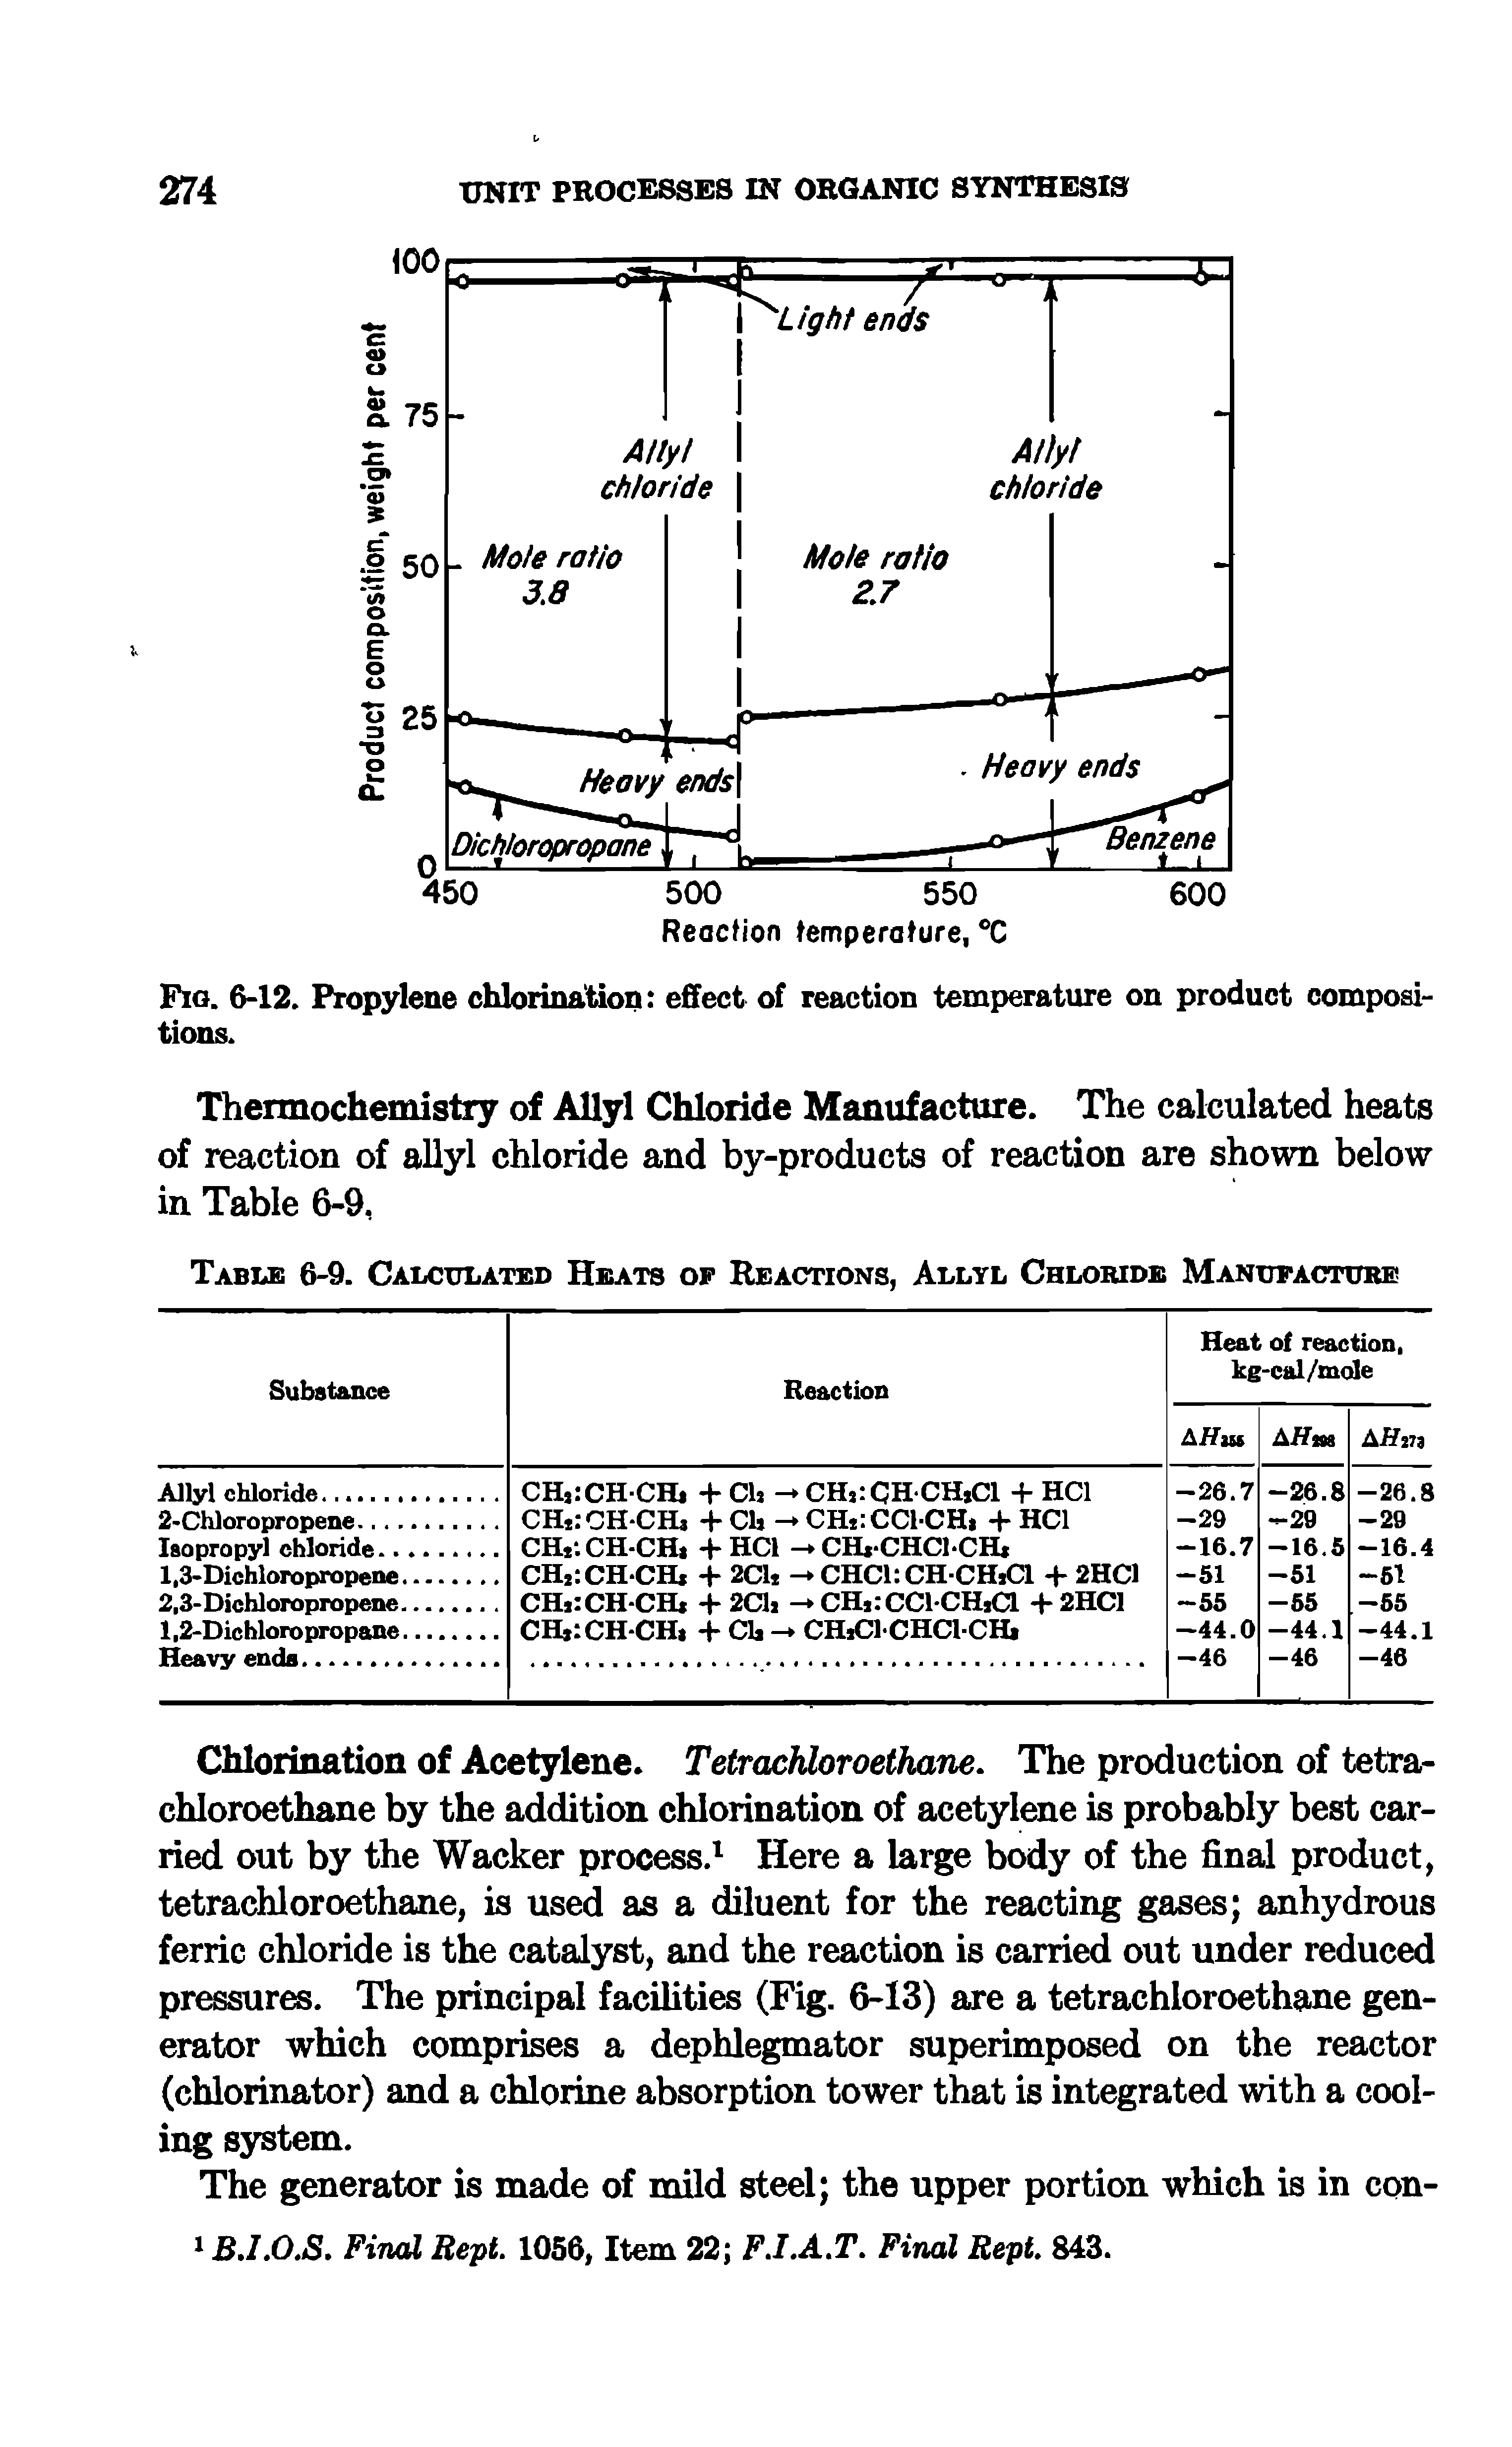 Fig. 6-12, Propylene chlorination effect of reaction temperature on product compositions.